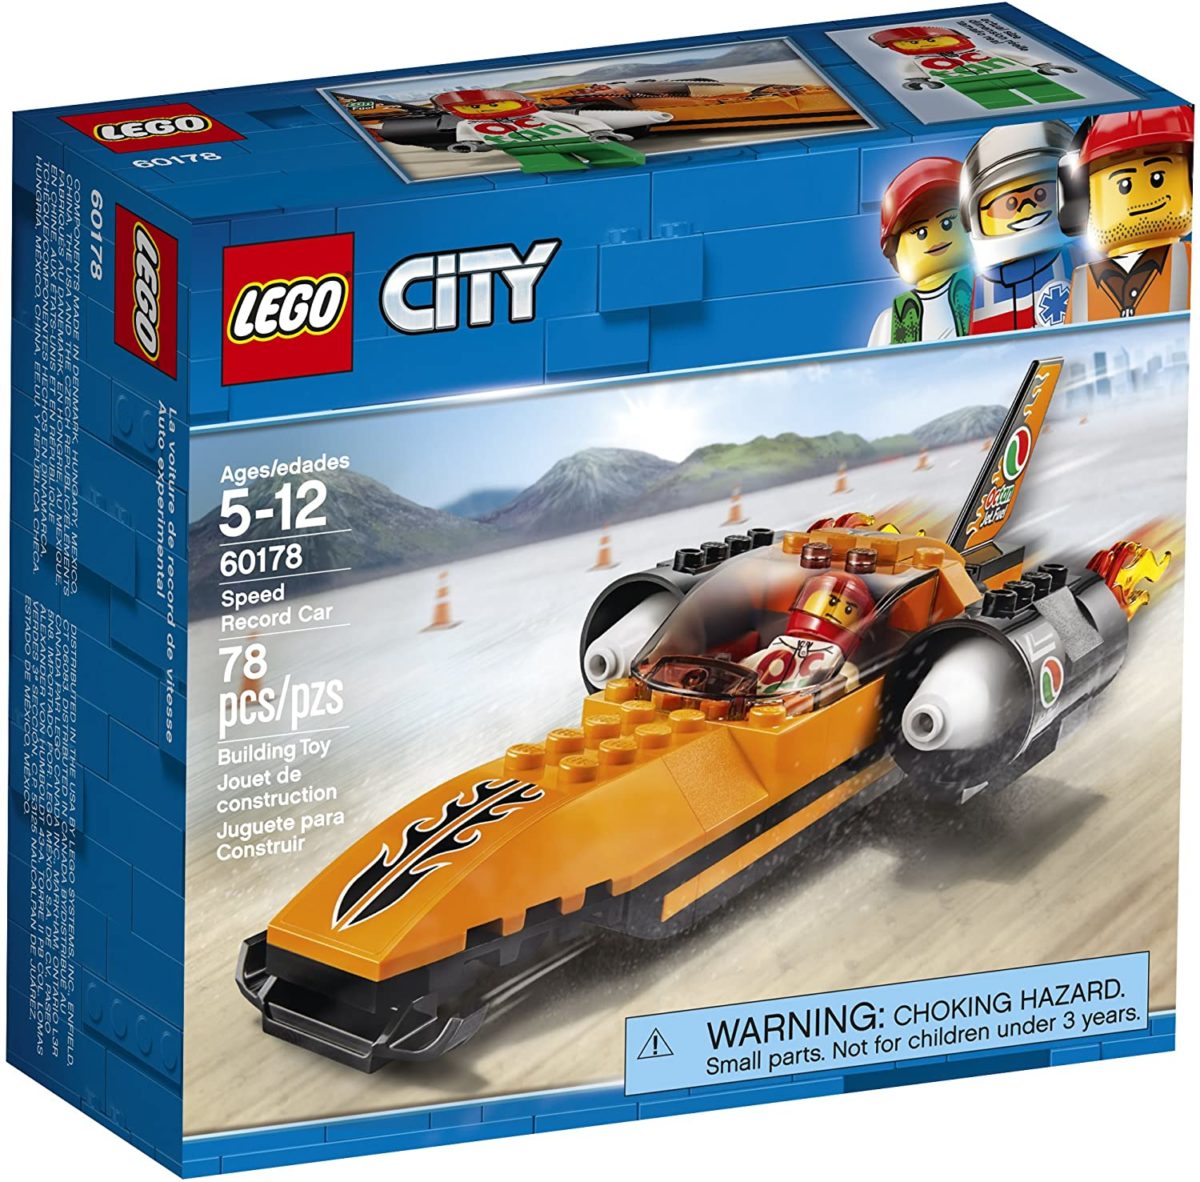 LEGO City Speed Record Car 60178 Building Kit - Top Toys and Gifts for Ten Year Old Boys 1